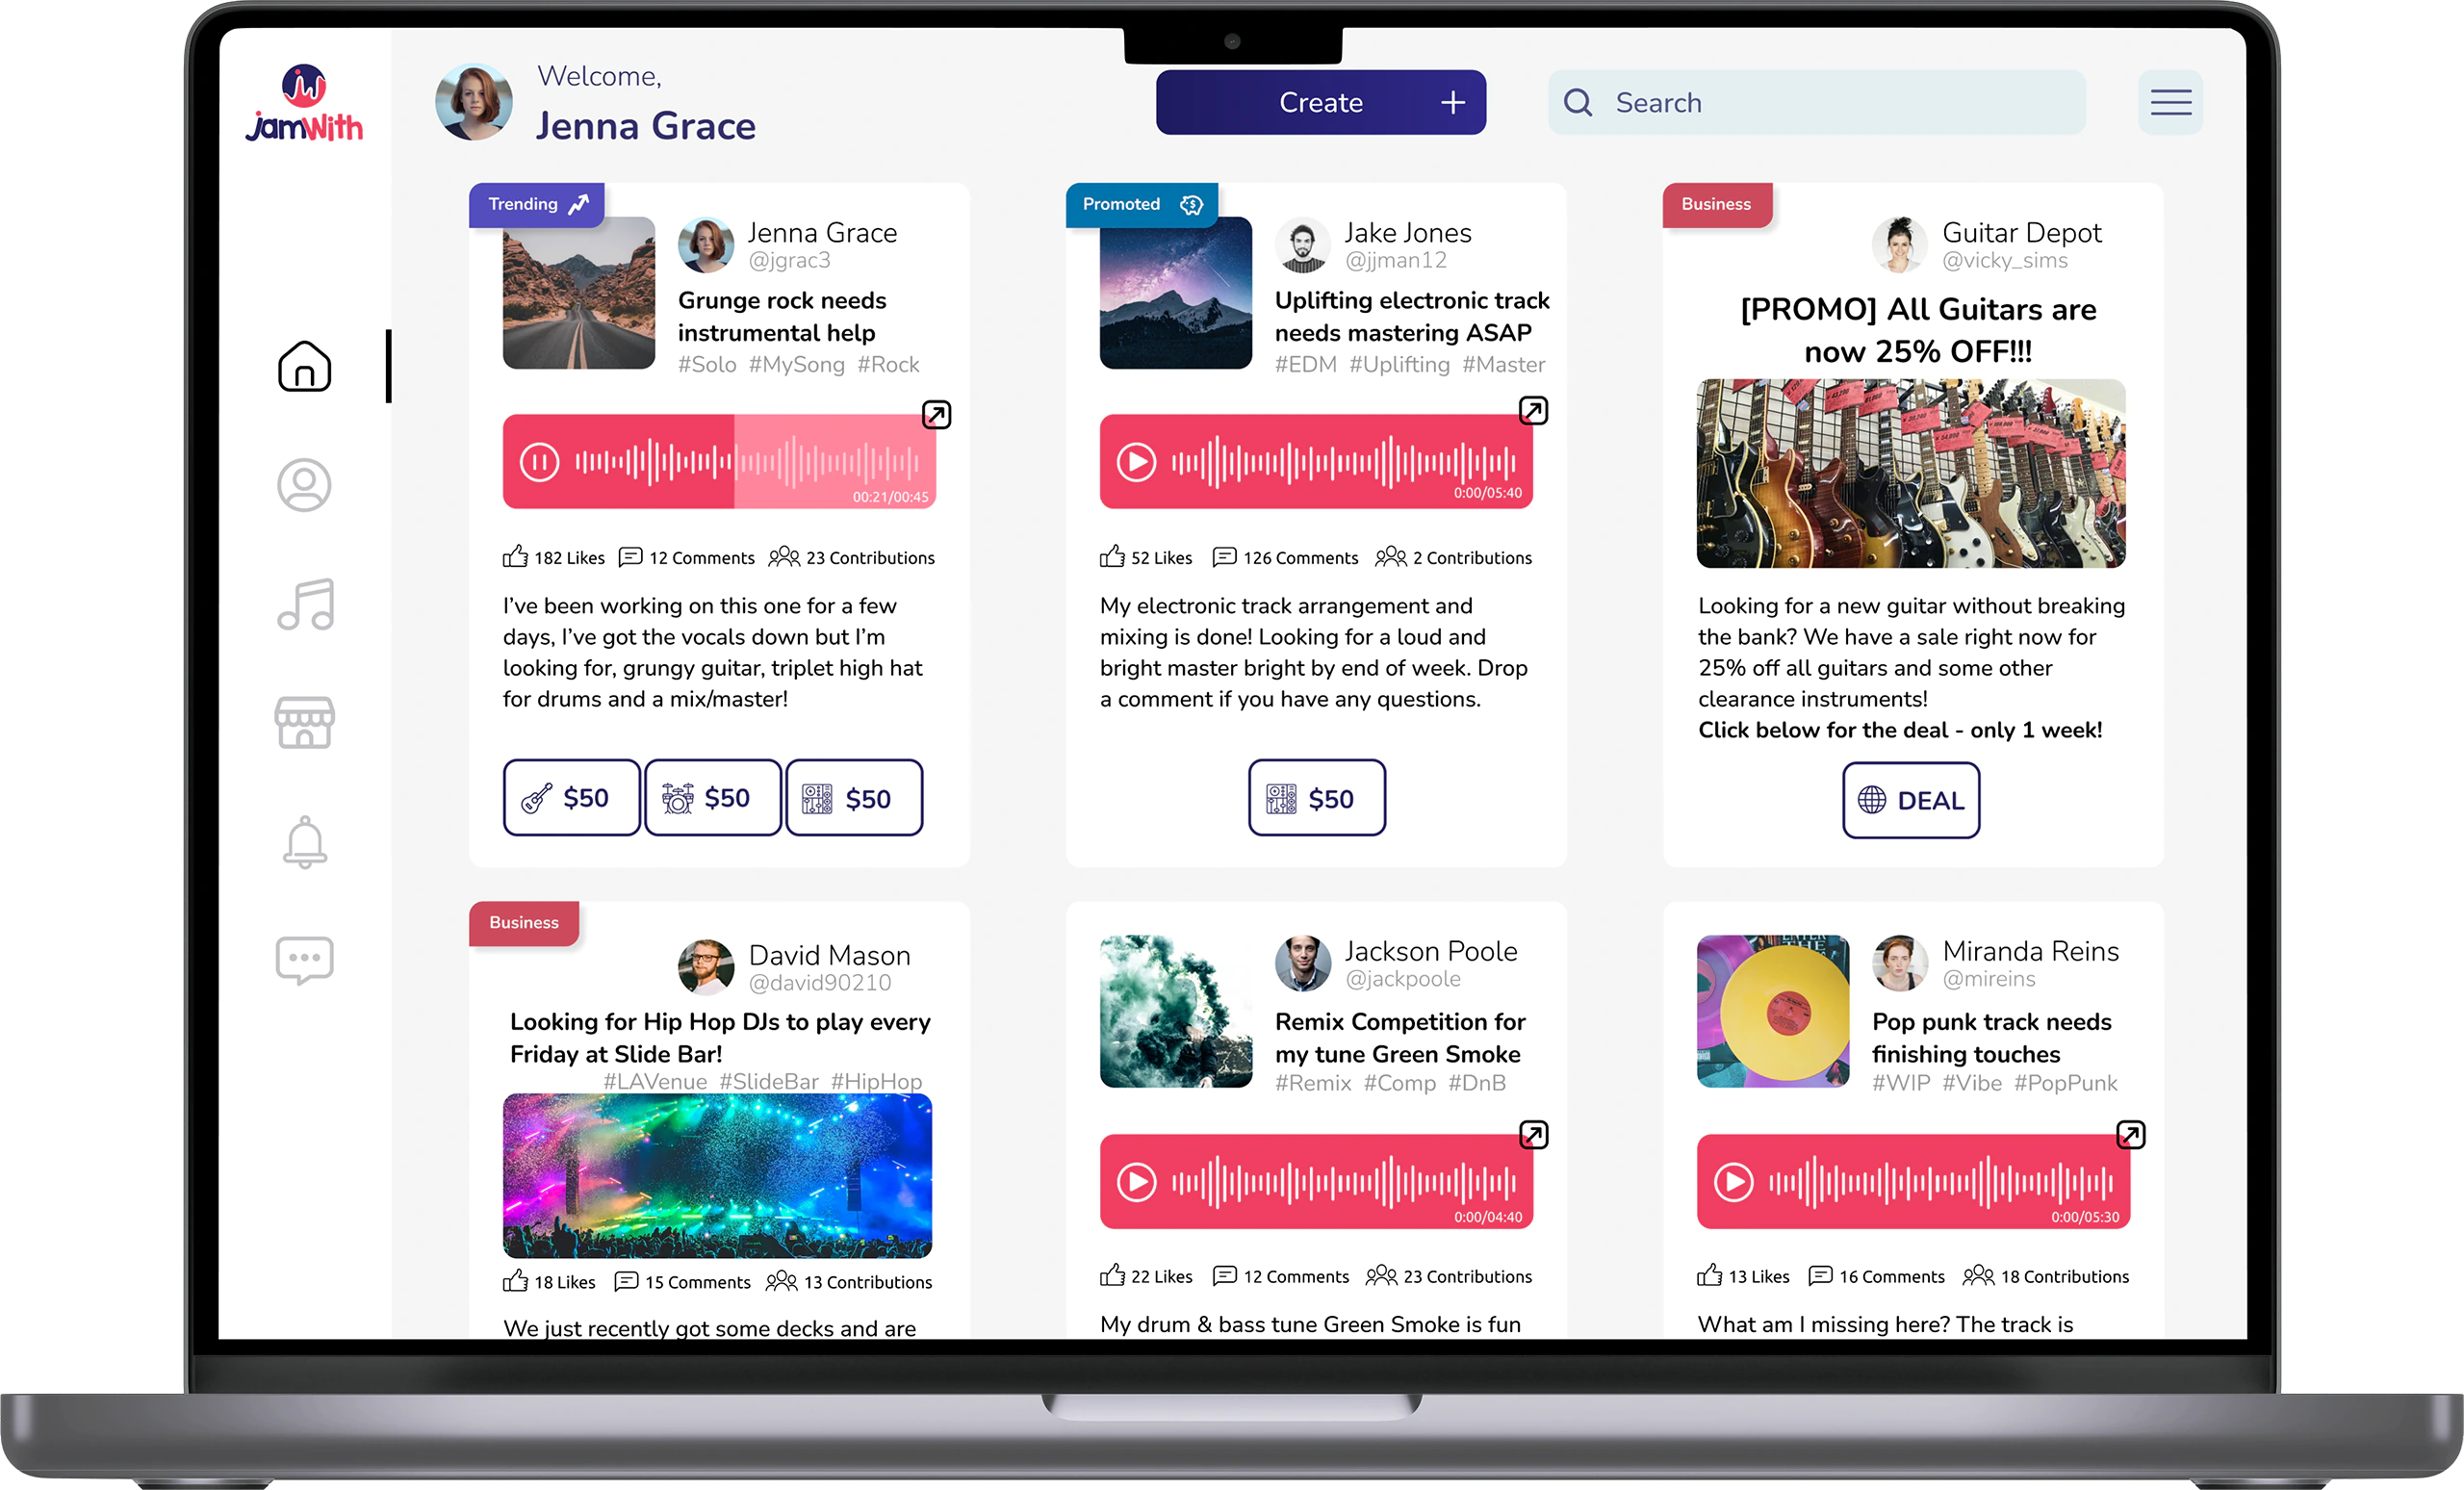 JamWith is where you can earn with music